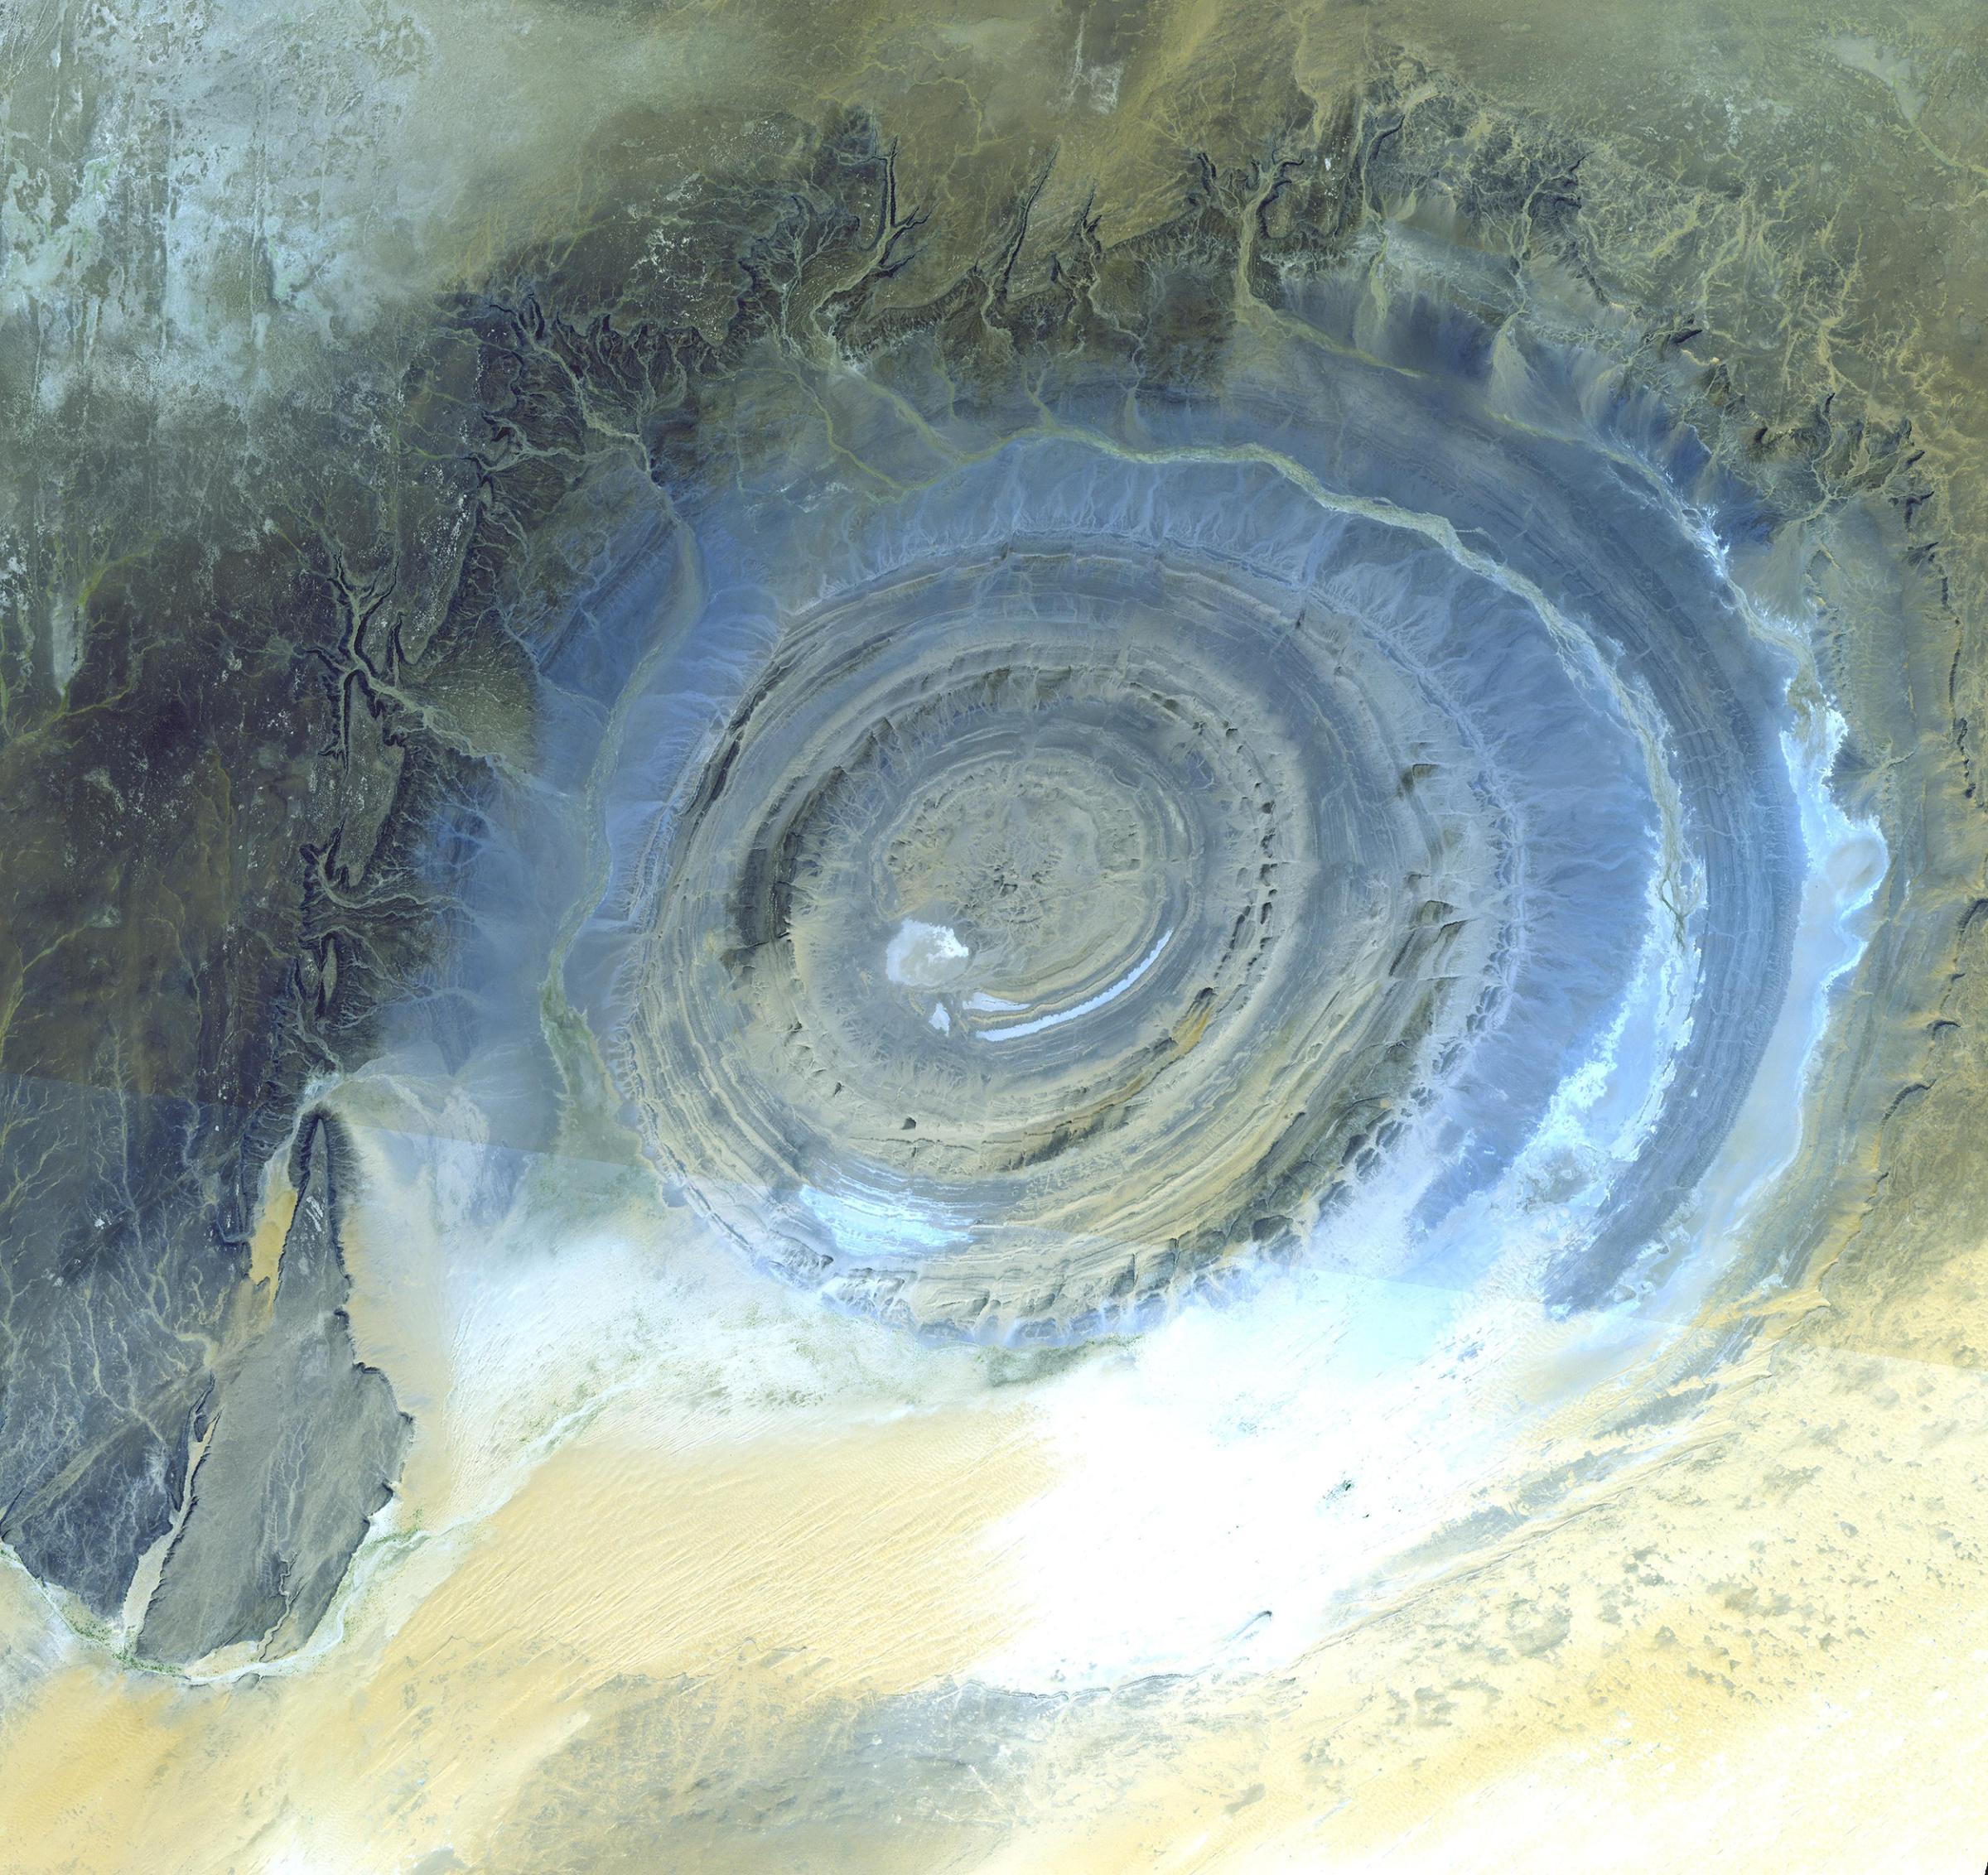 The Richat Structure, in the Sahara desert of Oudane, Mauritania has attracted attention since the earliest space missions because it forms a conspicuous bull's-eye in the otherwise rather featureless expanse. Initially interpreted as a meteorite impact structure because of its high degree of circularity, it is now thought to be merely a symmetrical uplift (circular anticline) that has been laid bare by erosion. The image was acquired Oct. 7, 2000.